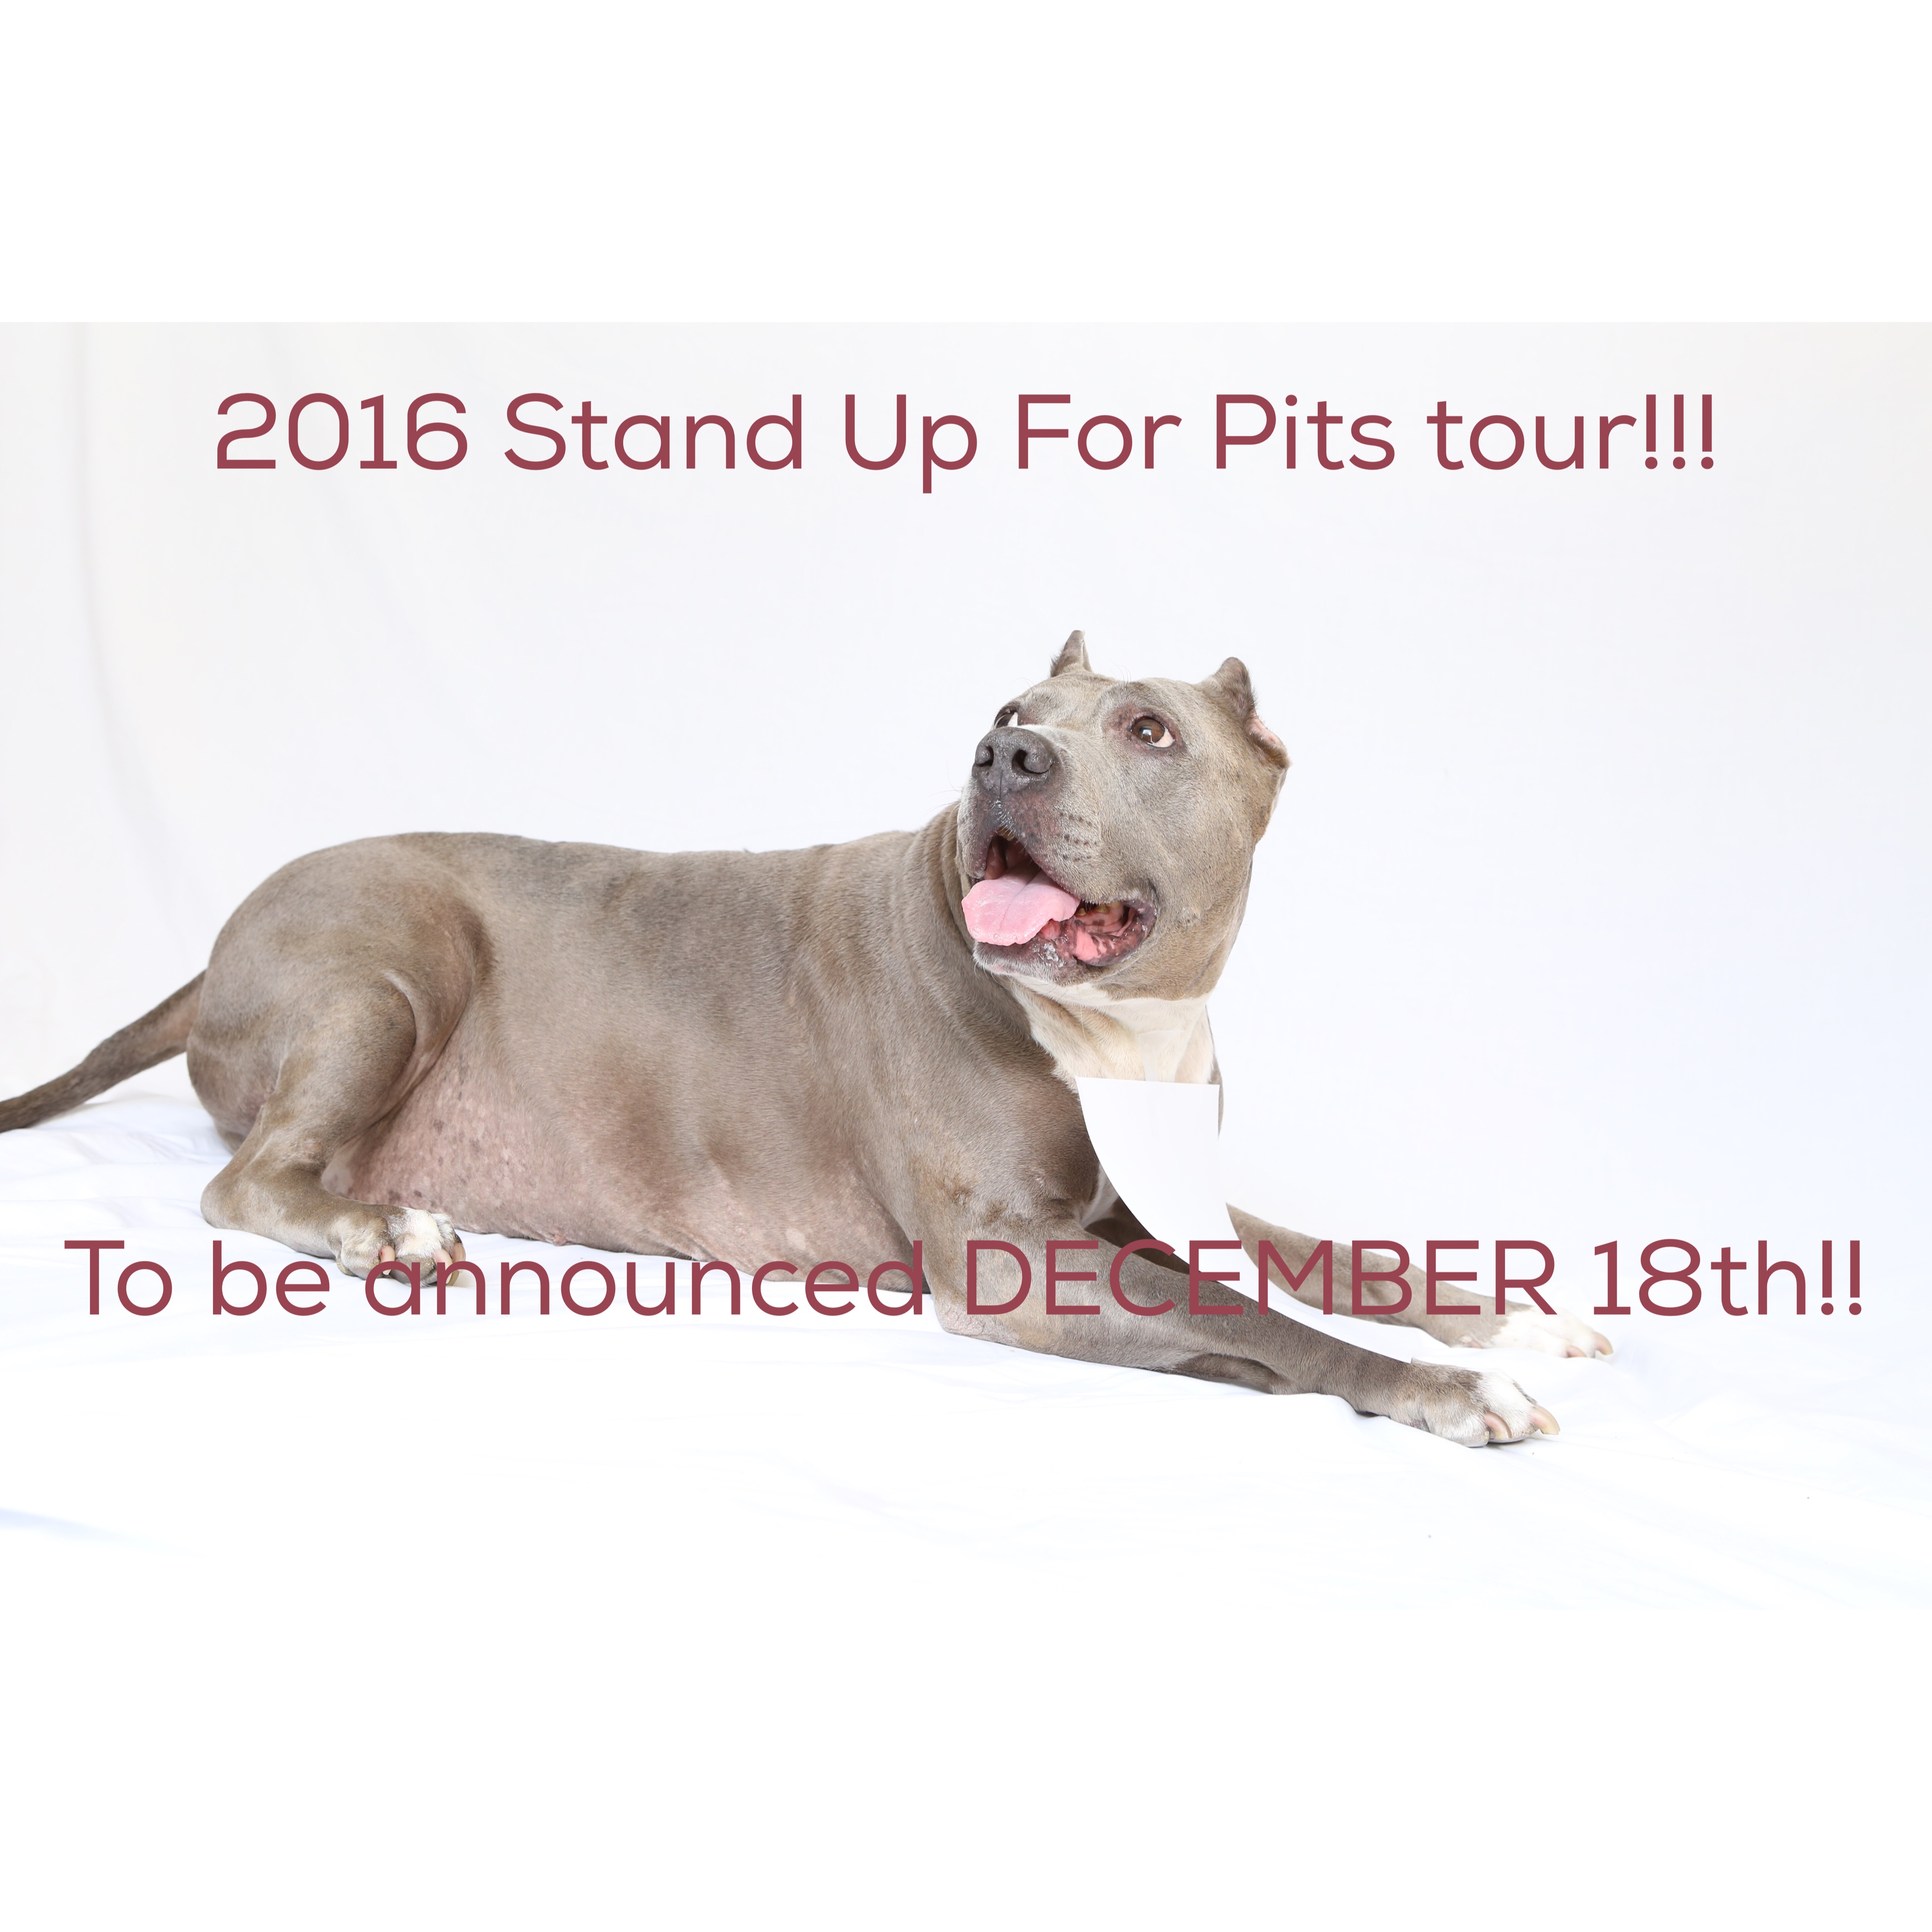 2016 Stand Up For Pits tour!!!!